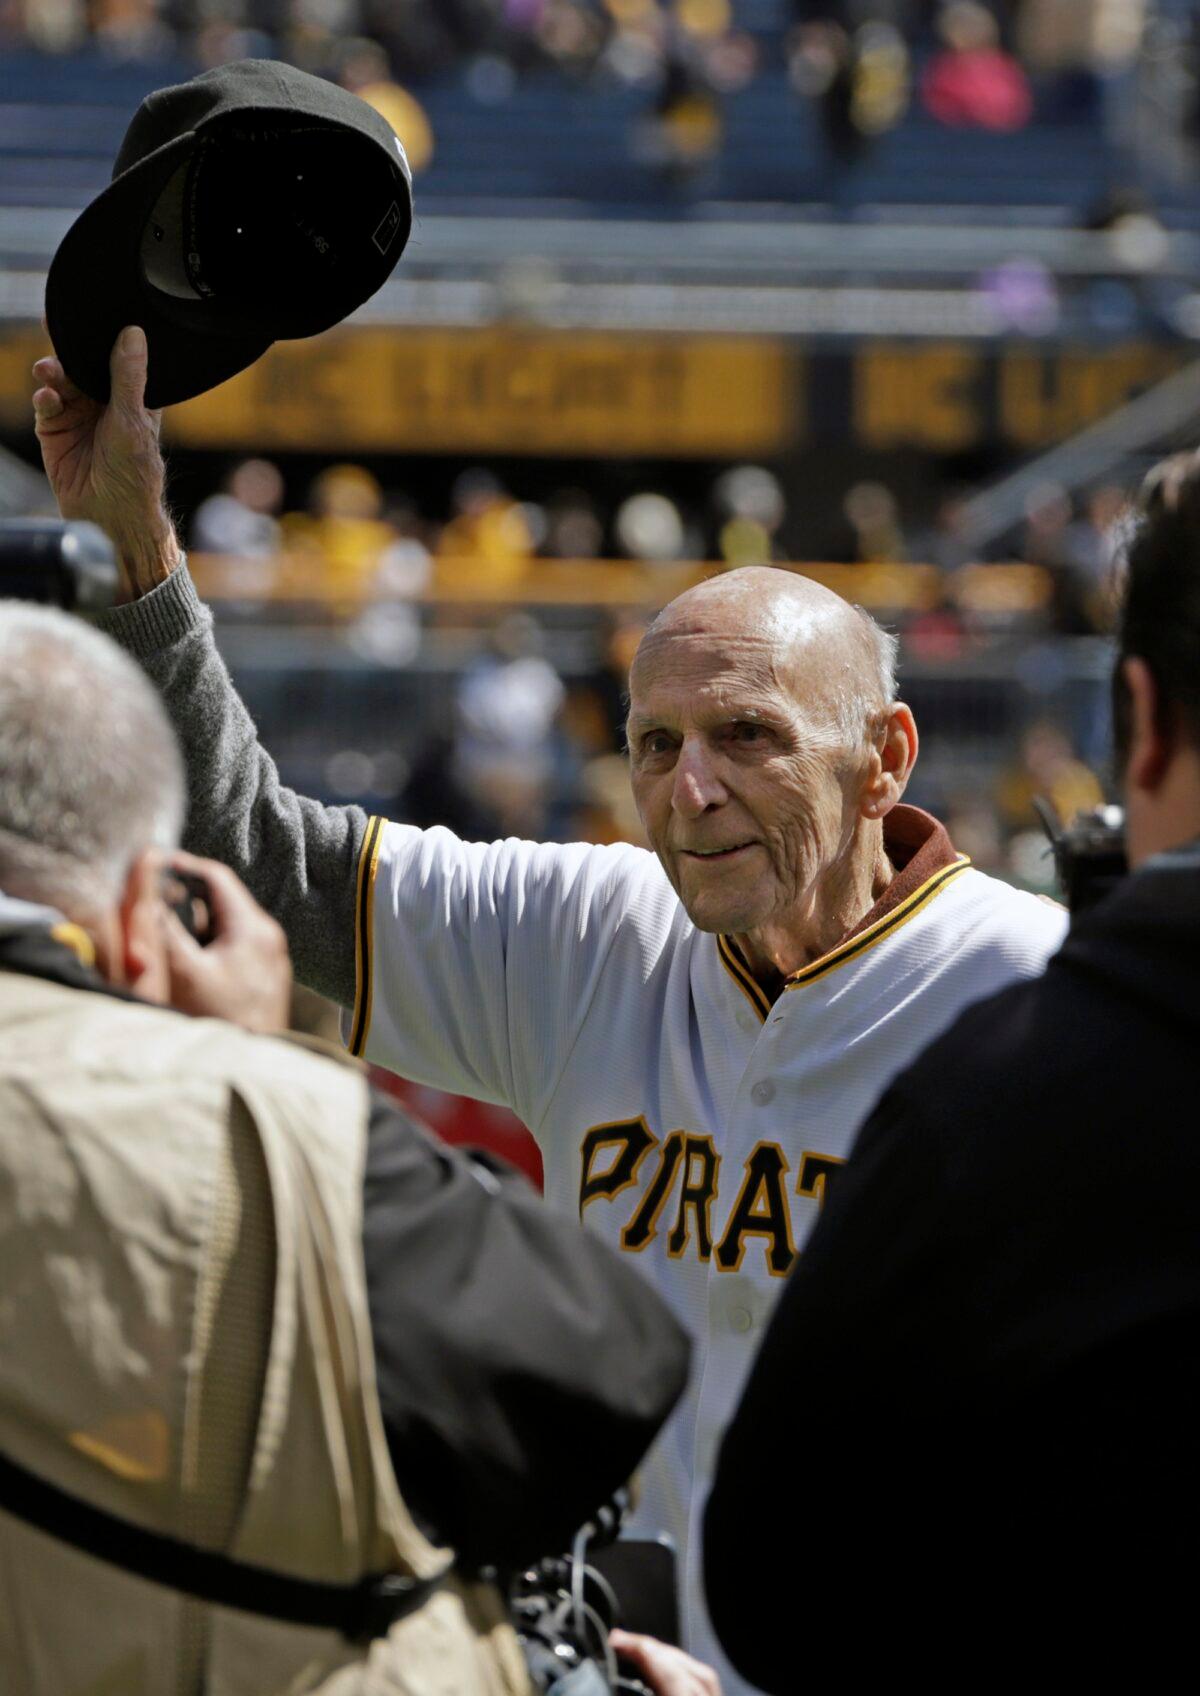 Former Pittsburgh Pirates shortstop Dick Groat (C) acknowledges fans at PNC Park during a pregame ceremony honoring his lifetime of service to the Pirates organization, before a baseball game against the St. Louis Cardinals in Pittsburgh on April 1, 2019. (Gene J. Puskar/AP Photo)